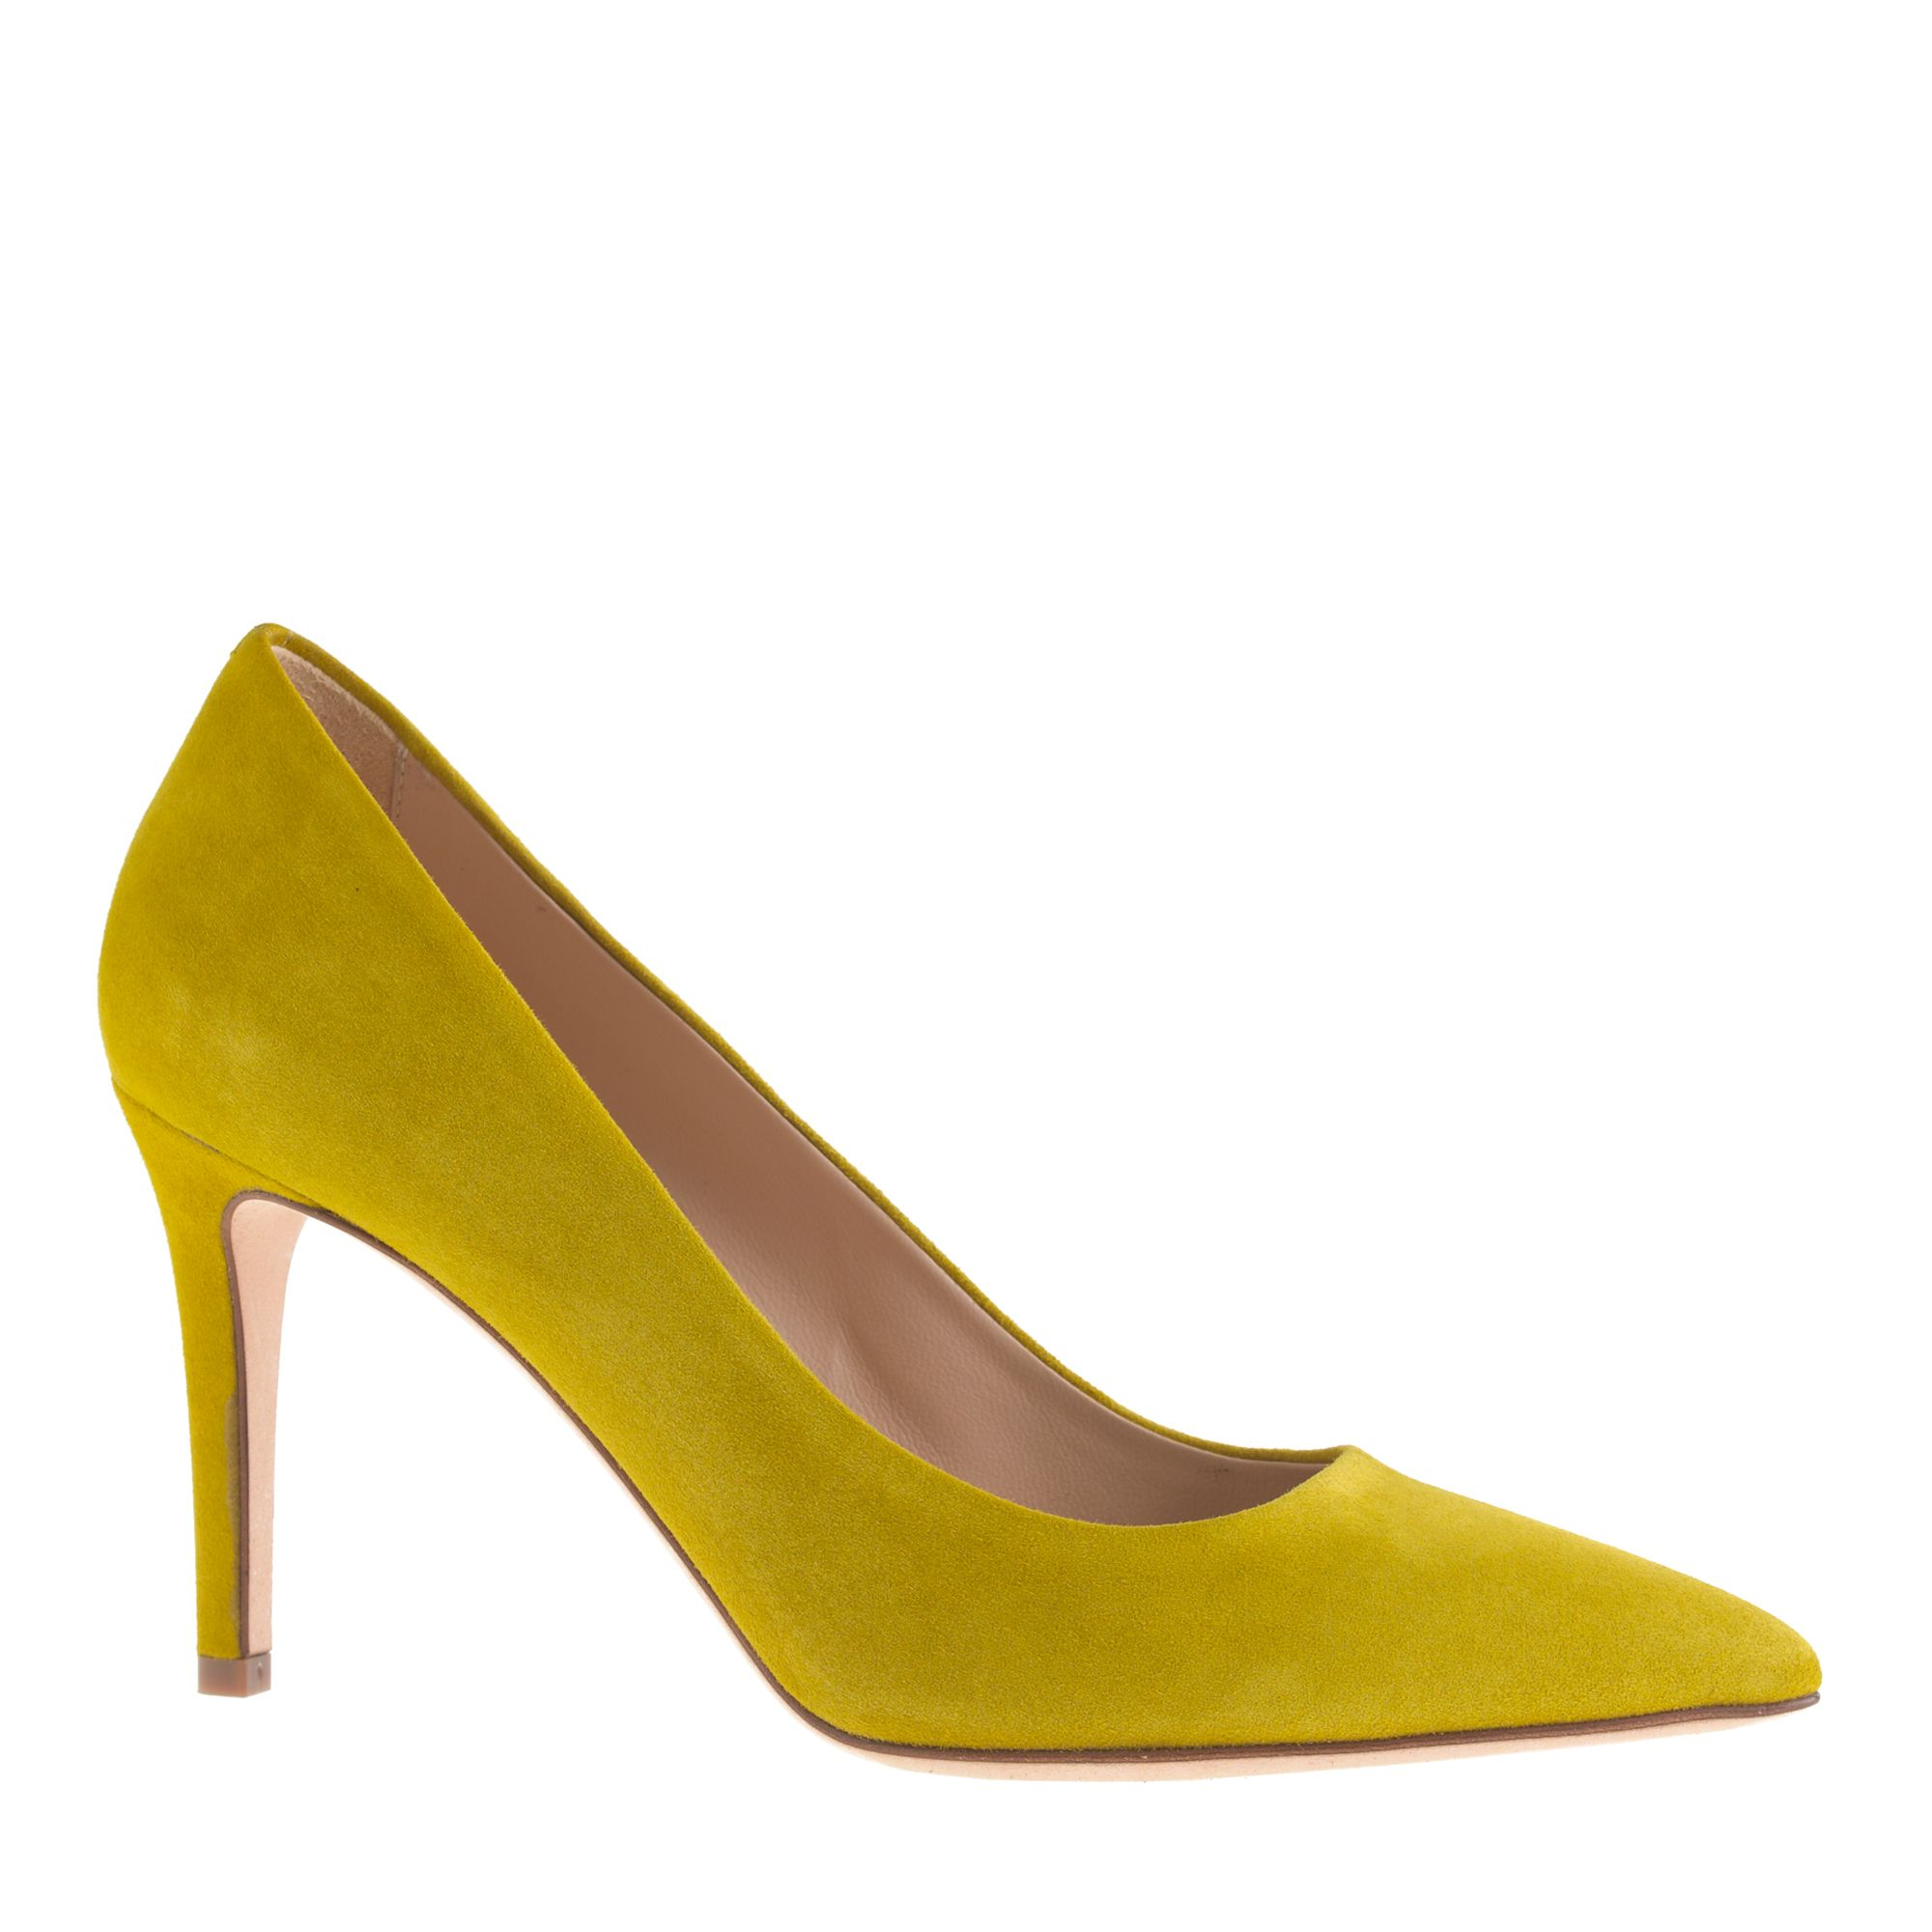 J.crew Everly Suede Pumps in Yellow (deep chartreuse) | Lyst